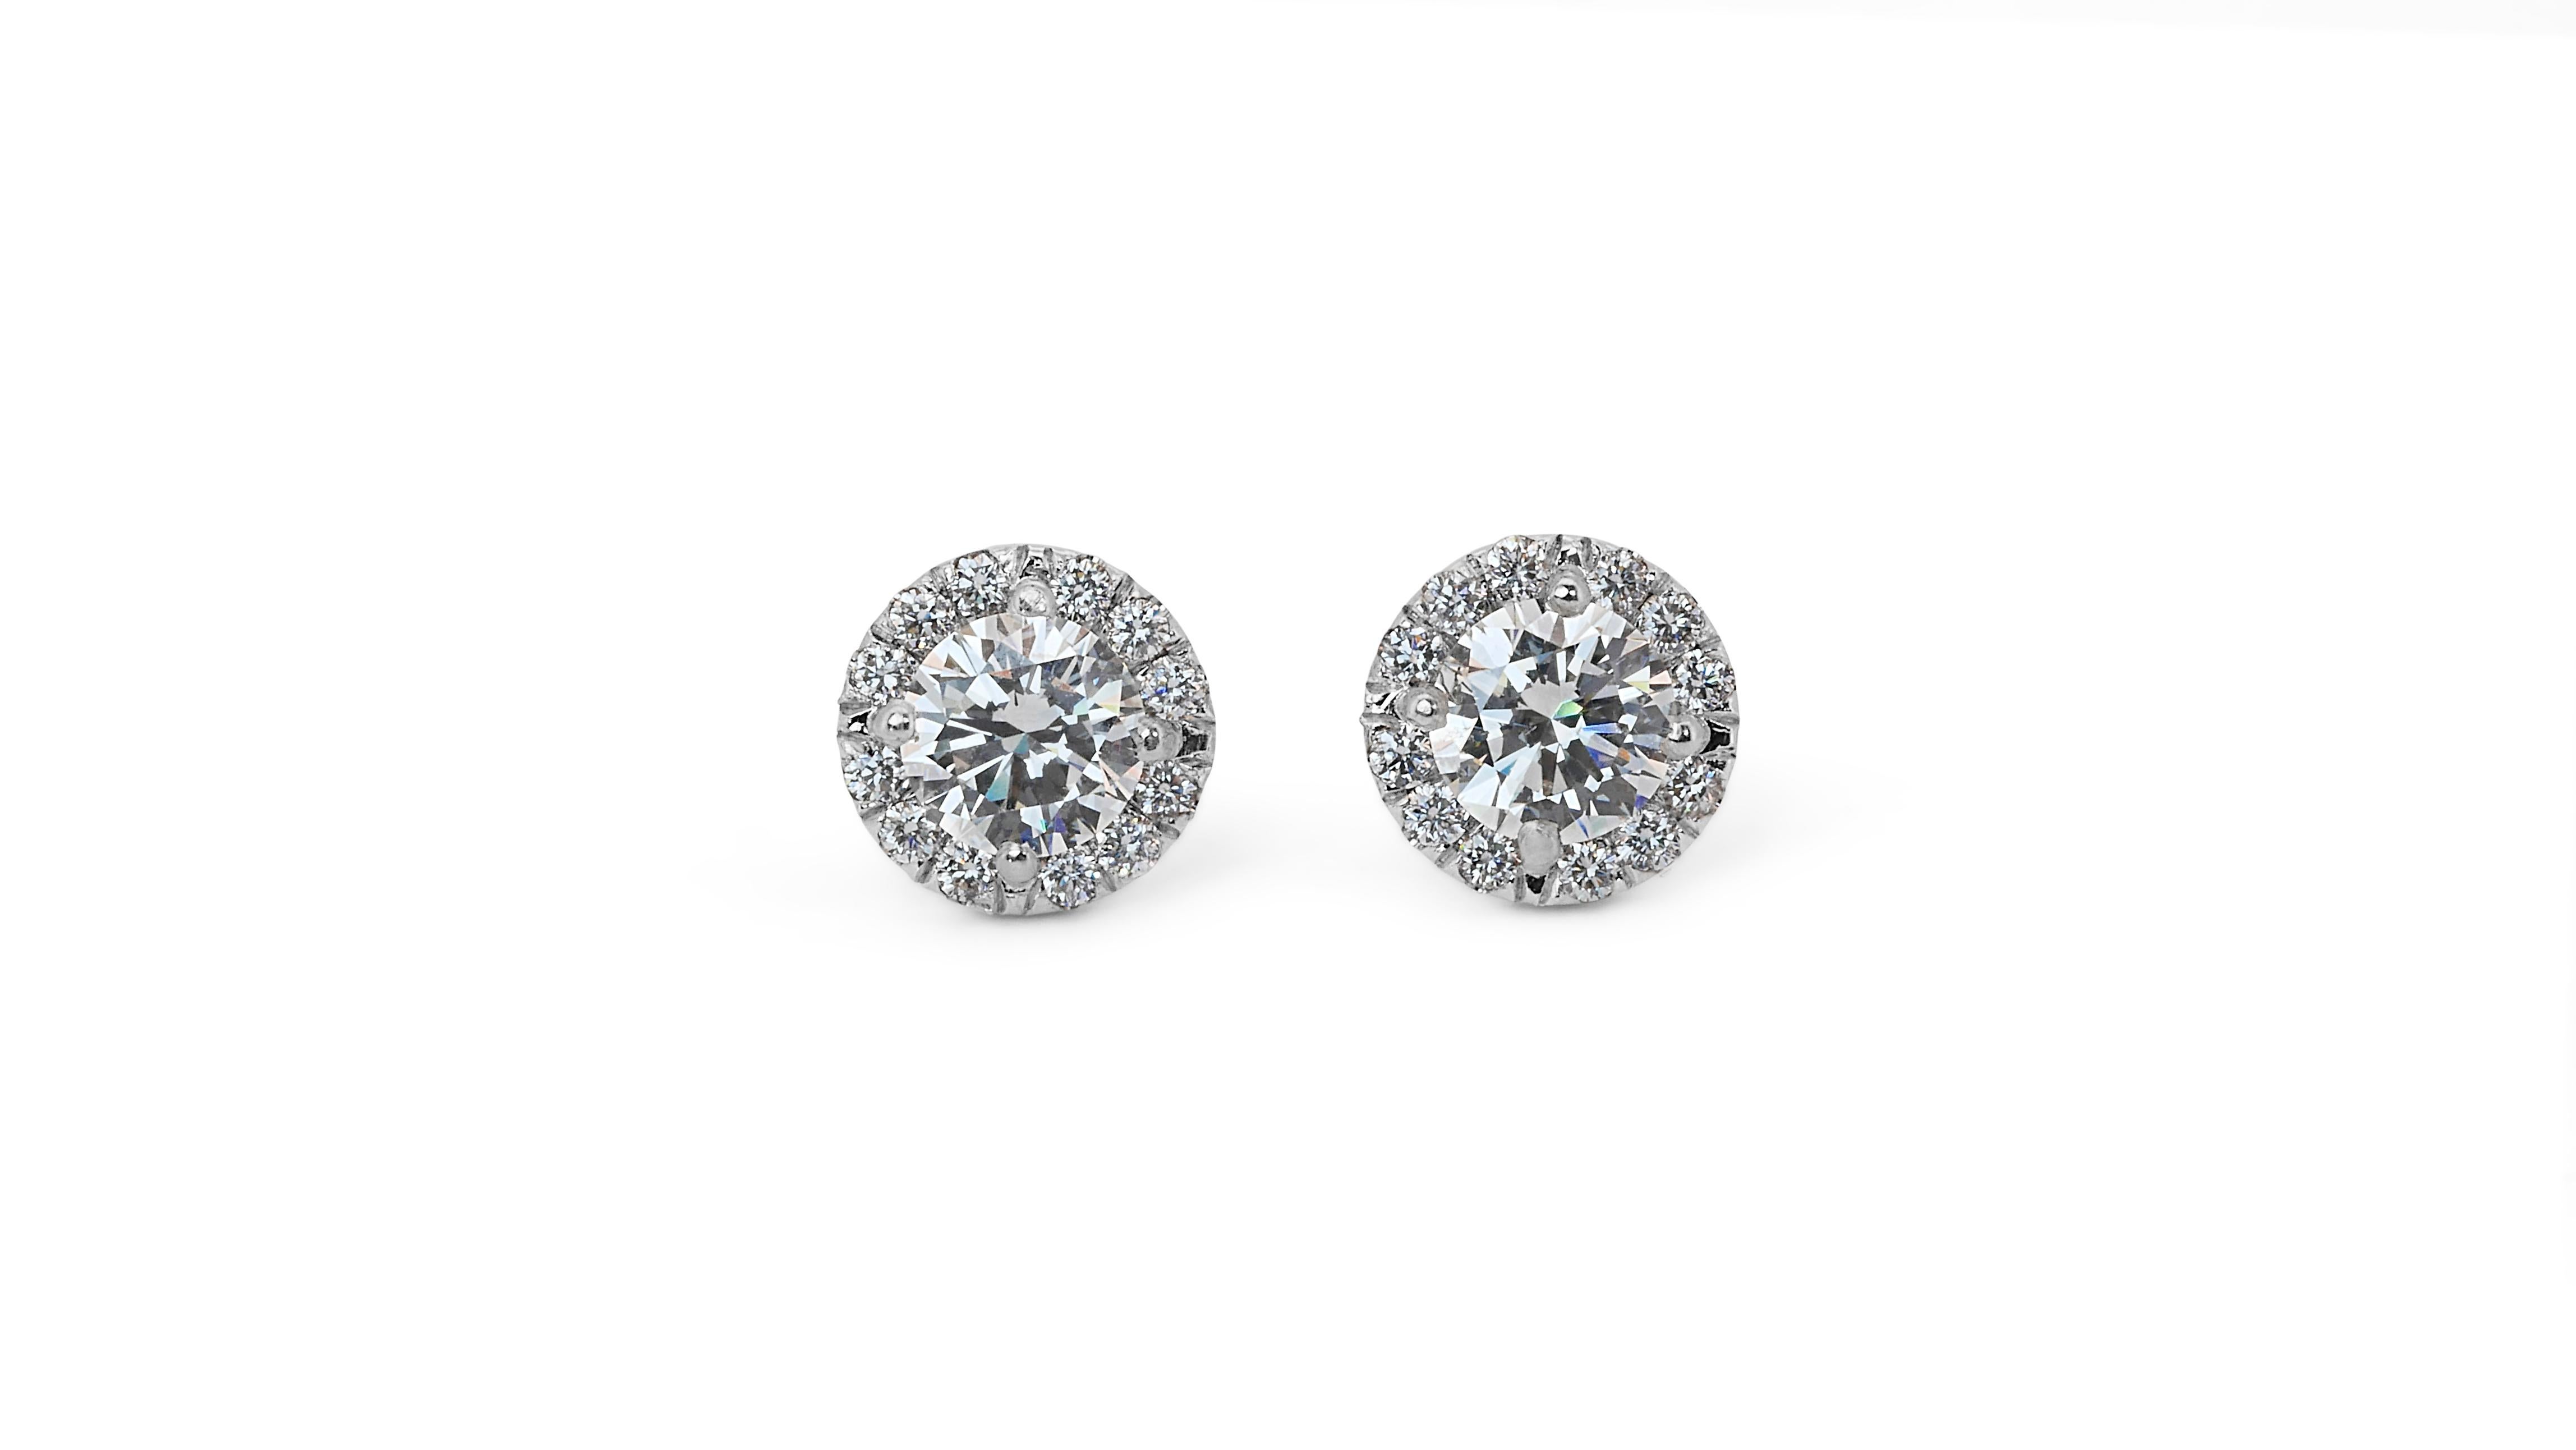 Fascinating 2.55ct Diamond Halo Earrings in 18k White Gold - GIA Certified

Step into the spotlight with these luxurious diamond halo earrings, meticulously crafted from 18k white gold. Featuring two central round brilliant diamonds, with a combined